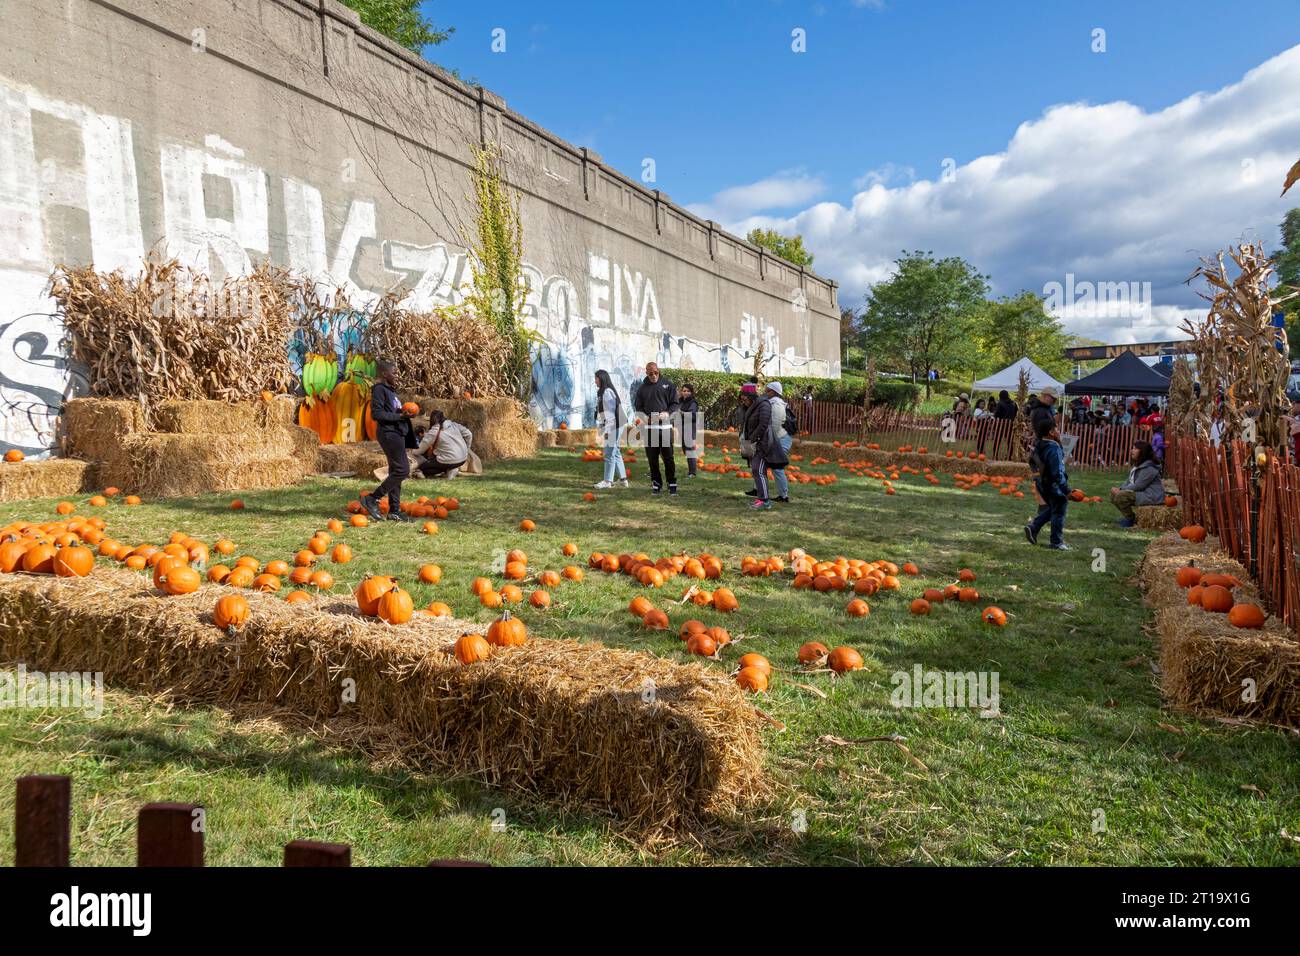 Detroit, Michigan - Thousands attended the Detroit Harvest Fest & Food Truck Rally. Sponsored by the Detroit Riverfront Conservancy, the two-day event Stock Photo